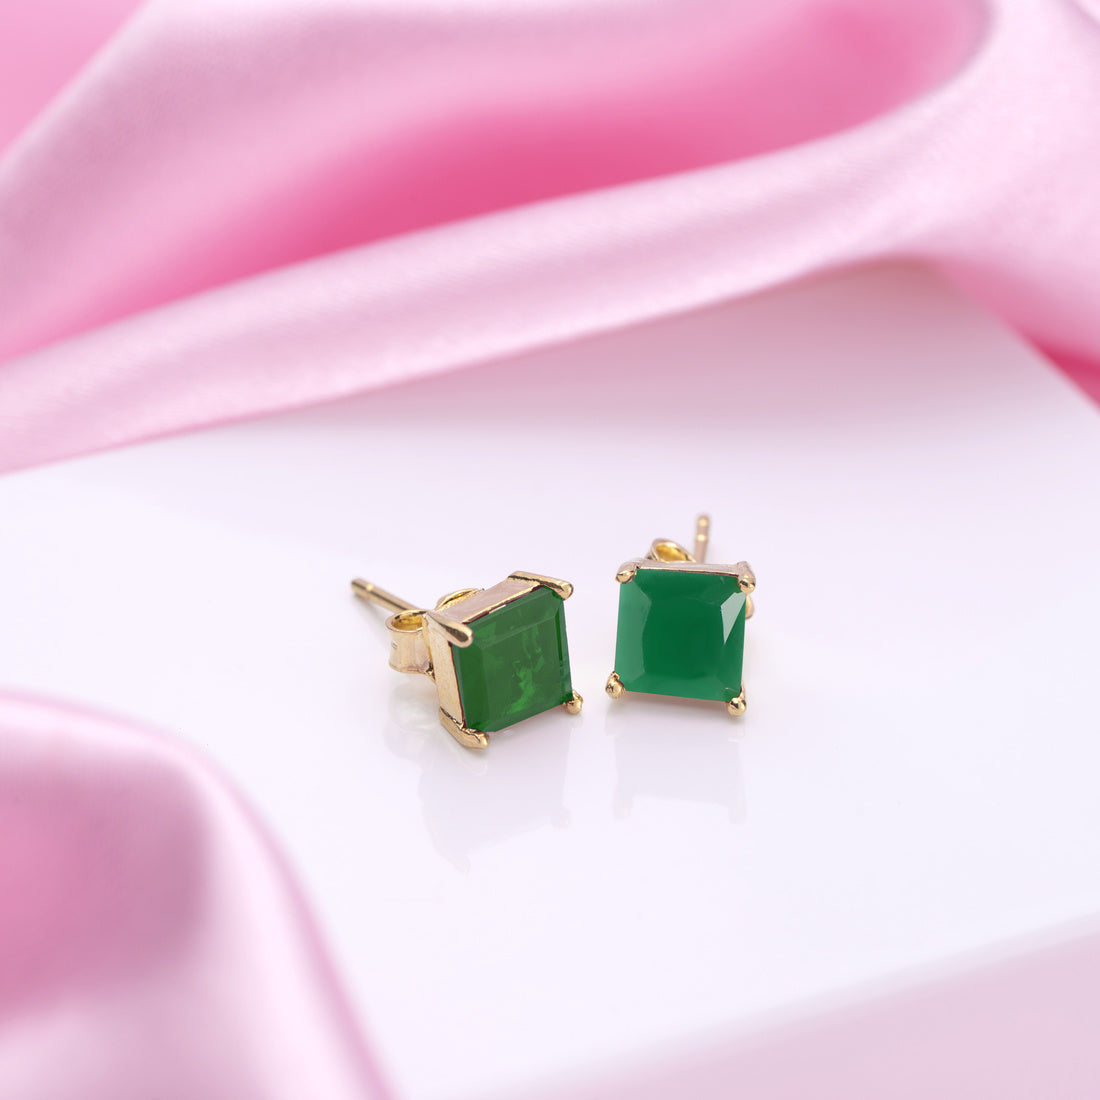 Golden Elegance Gold-Plated 925 Sterling Silver Green Cubic Zirconia Stud Earrings